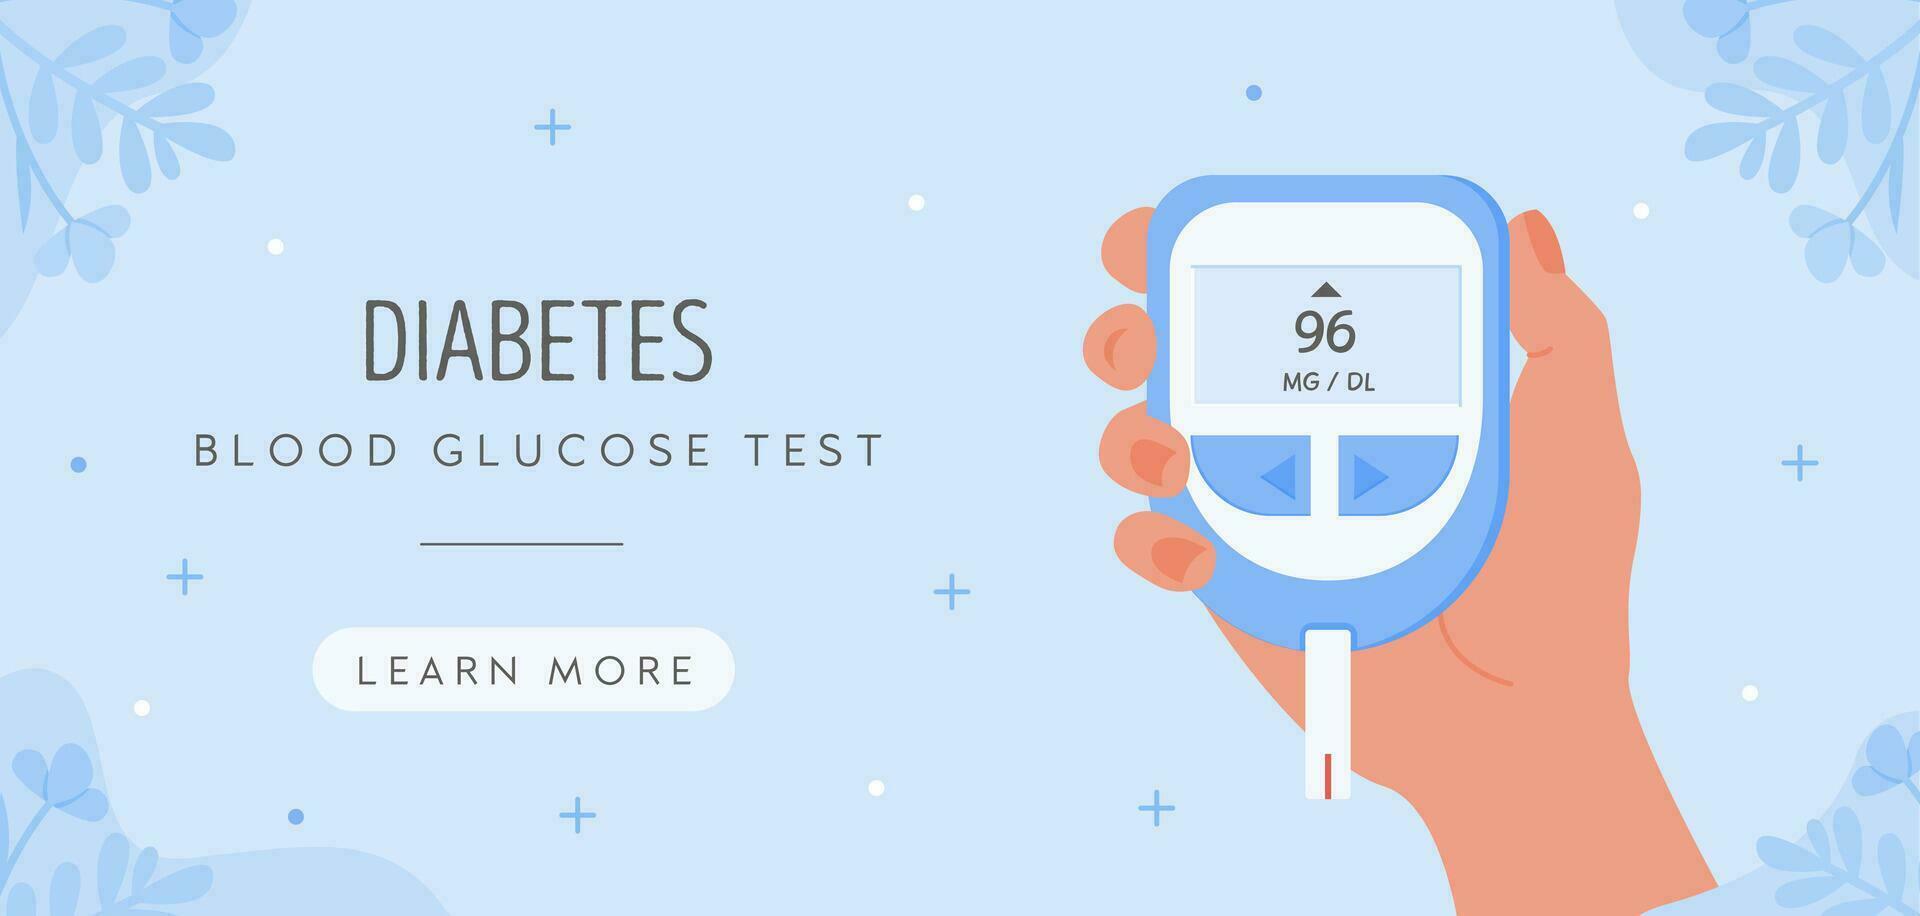 World Diabetes Day horizontal web banner. Human hand holding glucometer to measure sugar level by finger stick. Blood glucose test. Sugar test control. Vector template illustration in flat style.